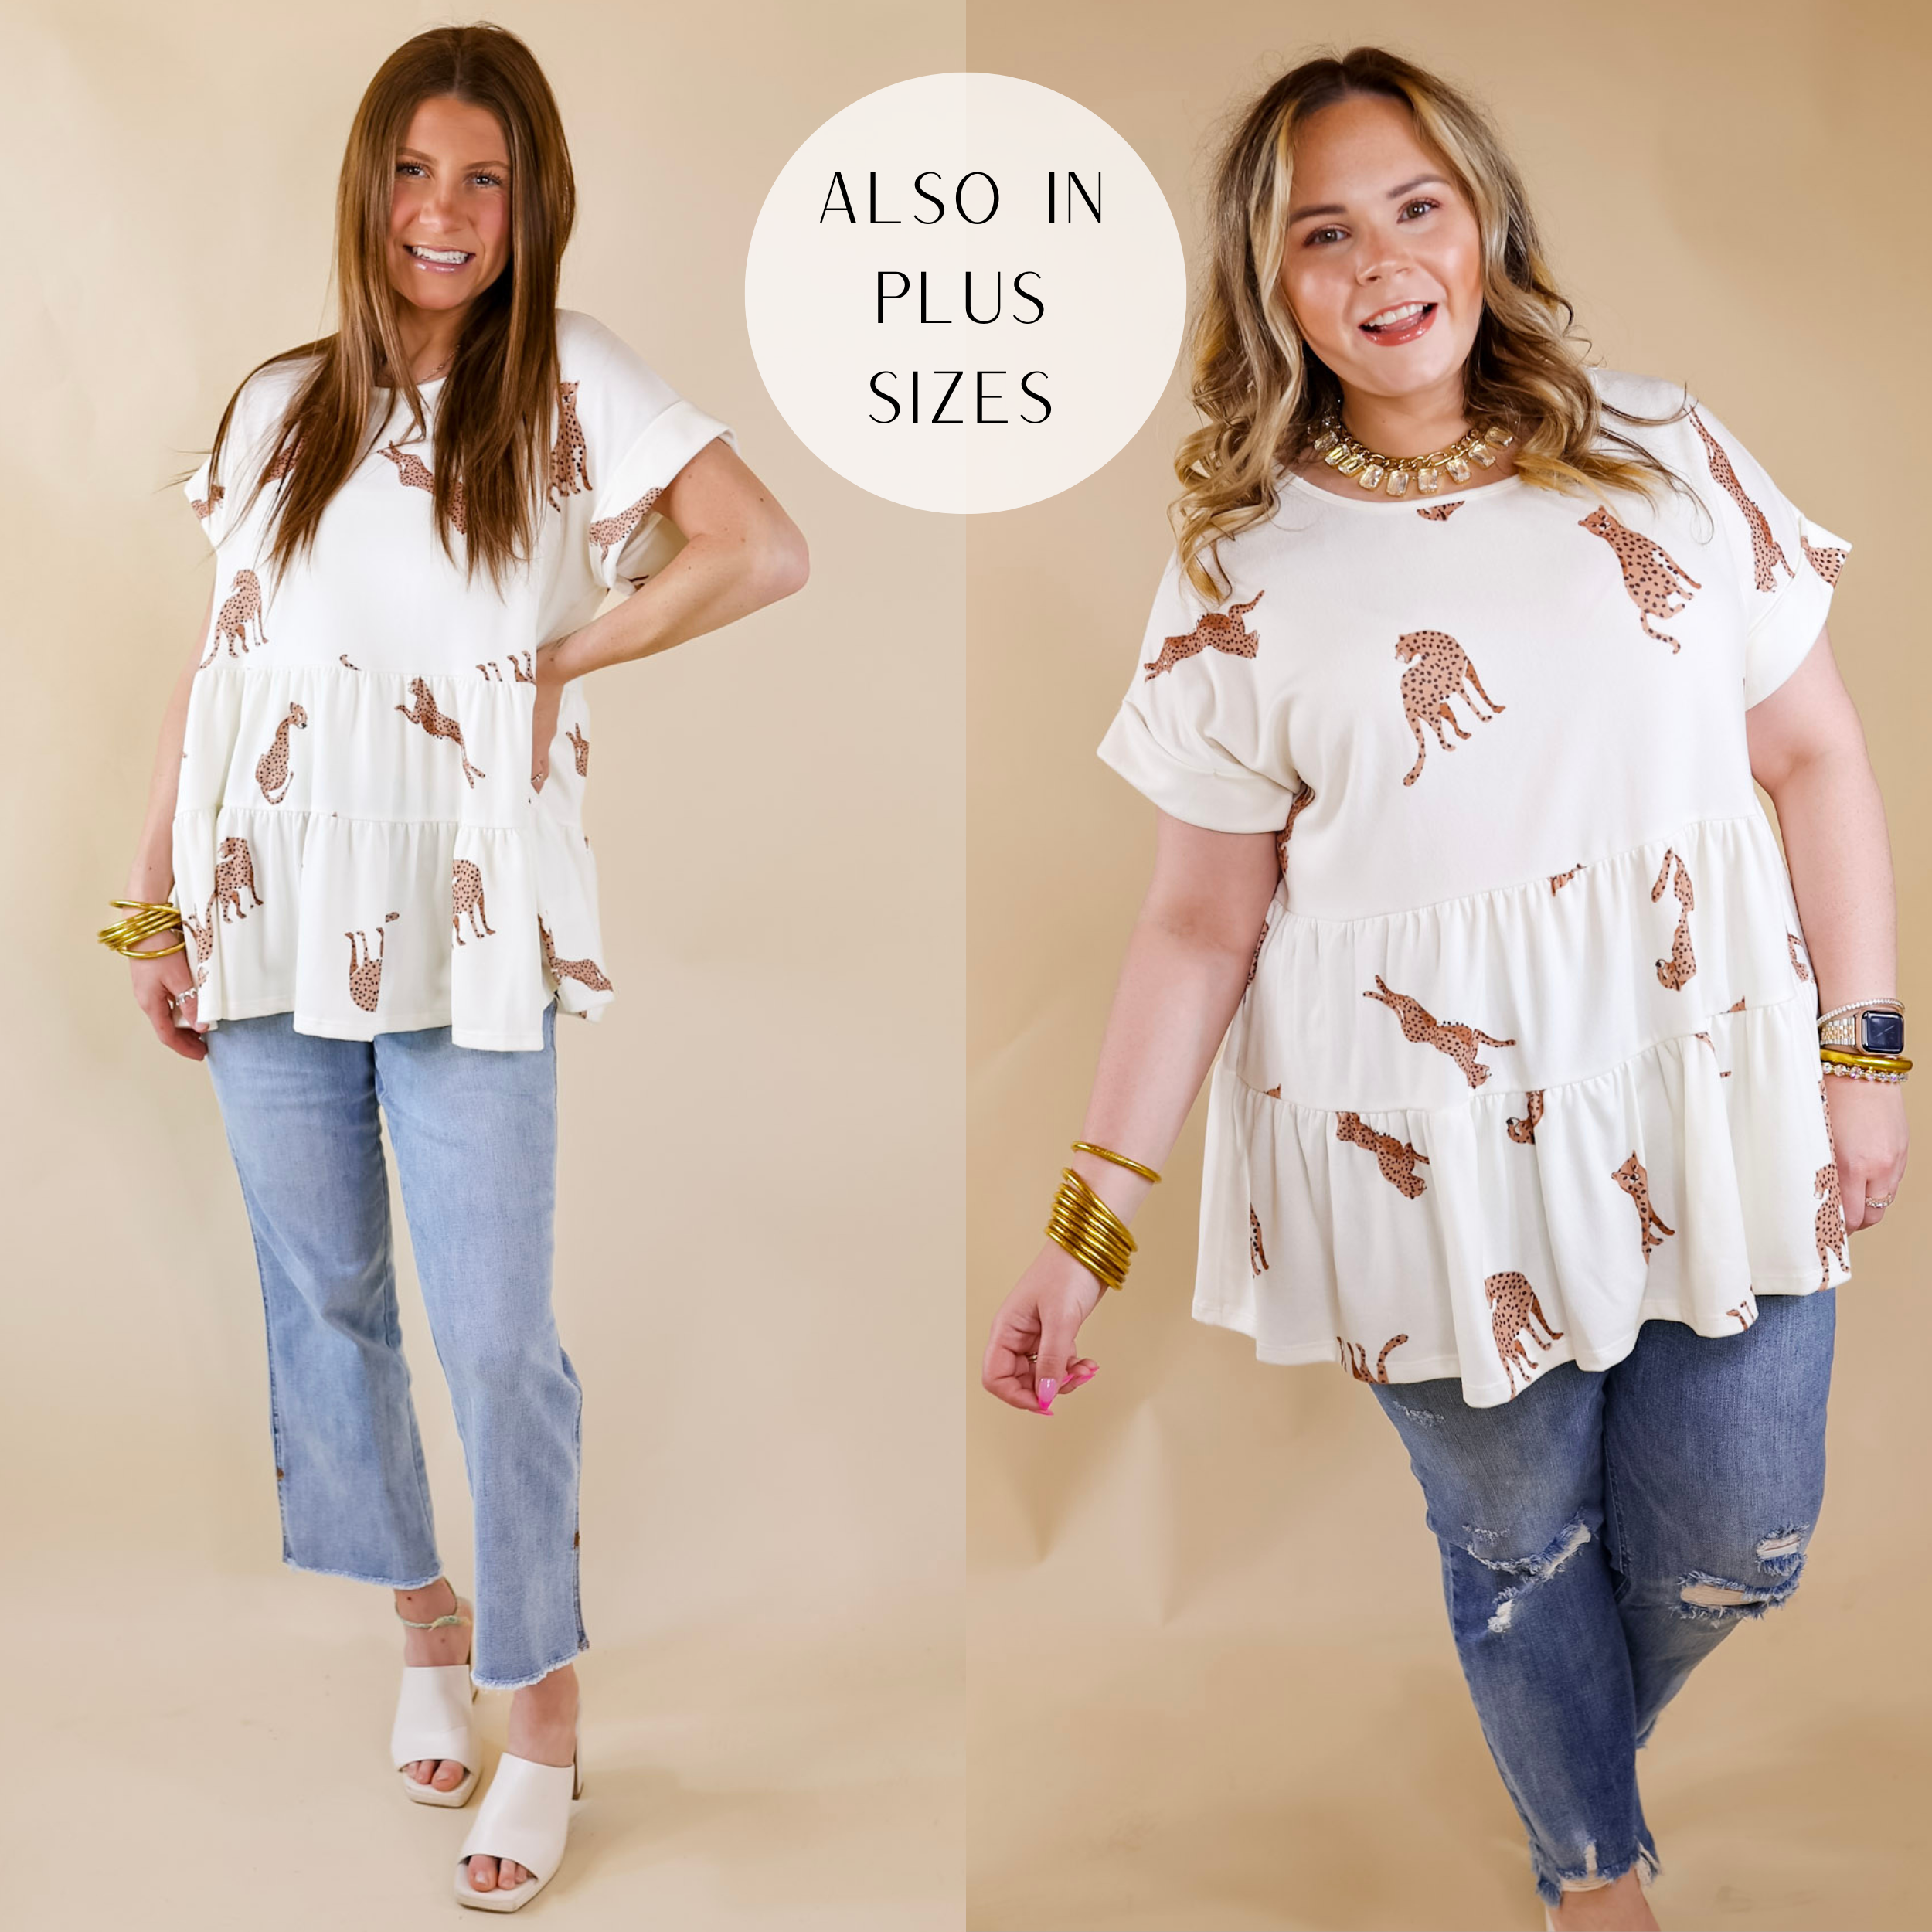 Model is wearing a tiered babydoll top with cheetahs printed all over. Size small model has this top paired with light wash jeans, ivory heels, and gold jewelry. Size large model has it paired with distressed jeans and gold jewelry.